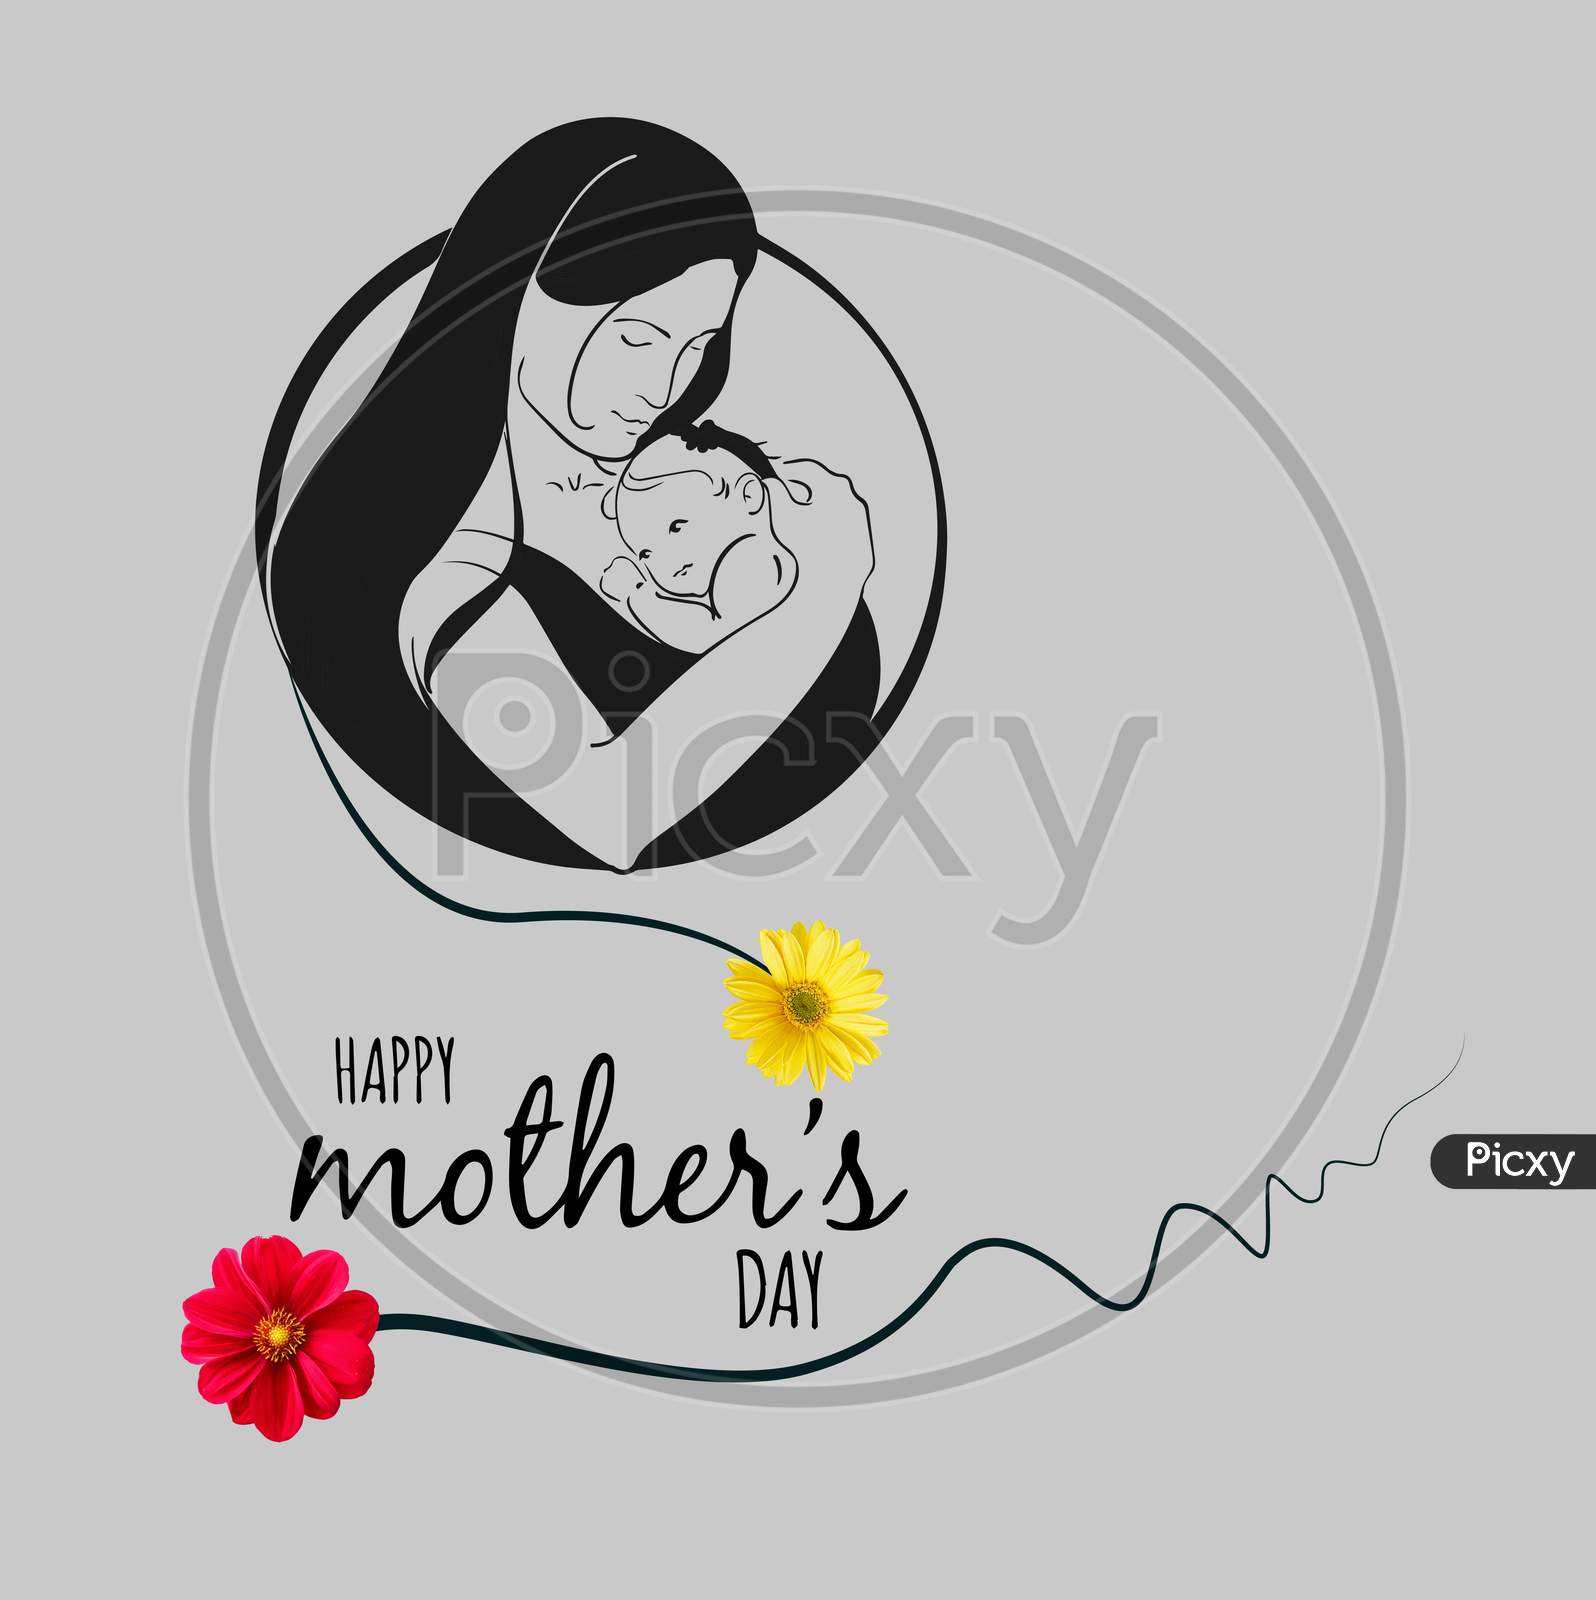 Mothers Day. Silhouette of a girl with a baby in her arms. Young and beautiful woman. Happy motherhood.